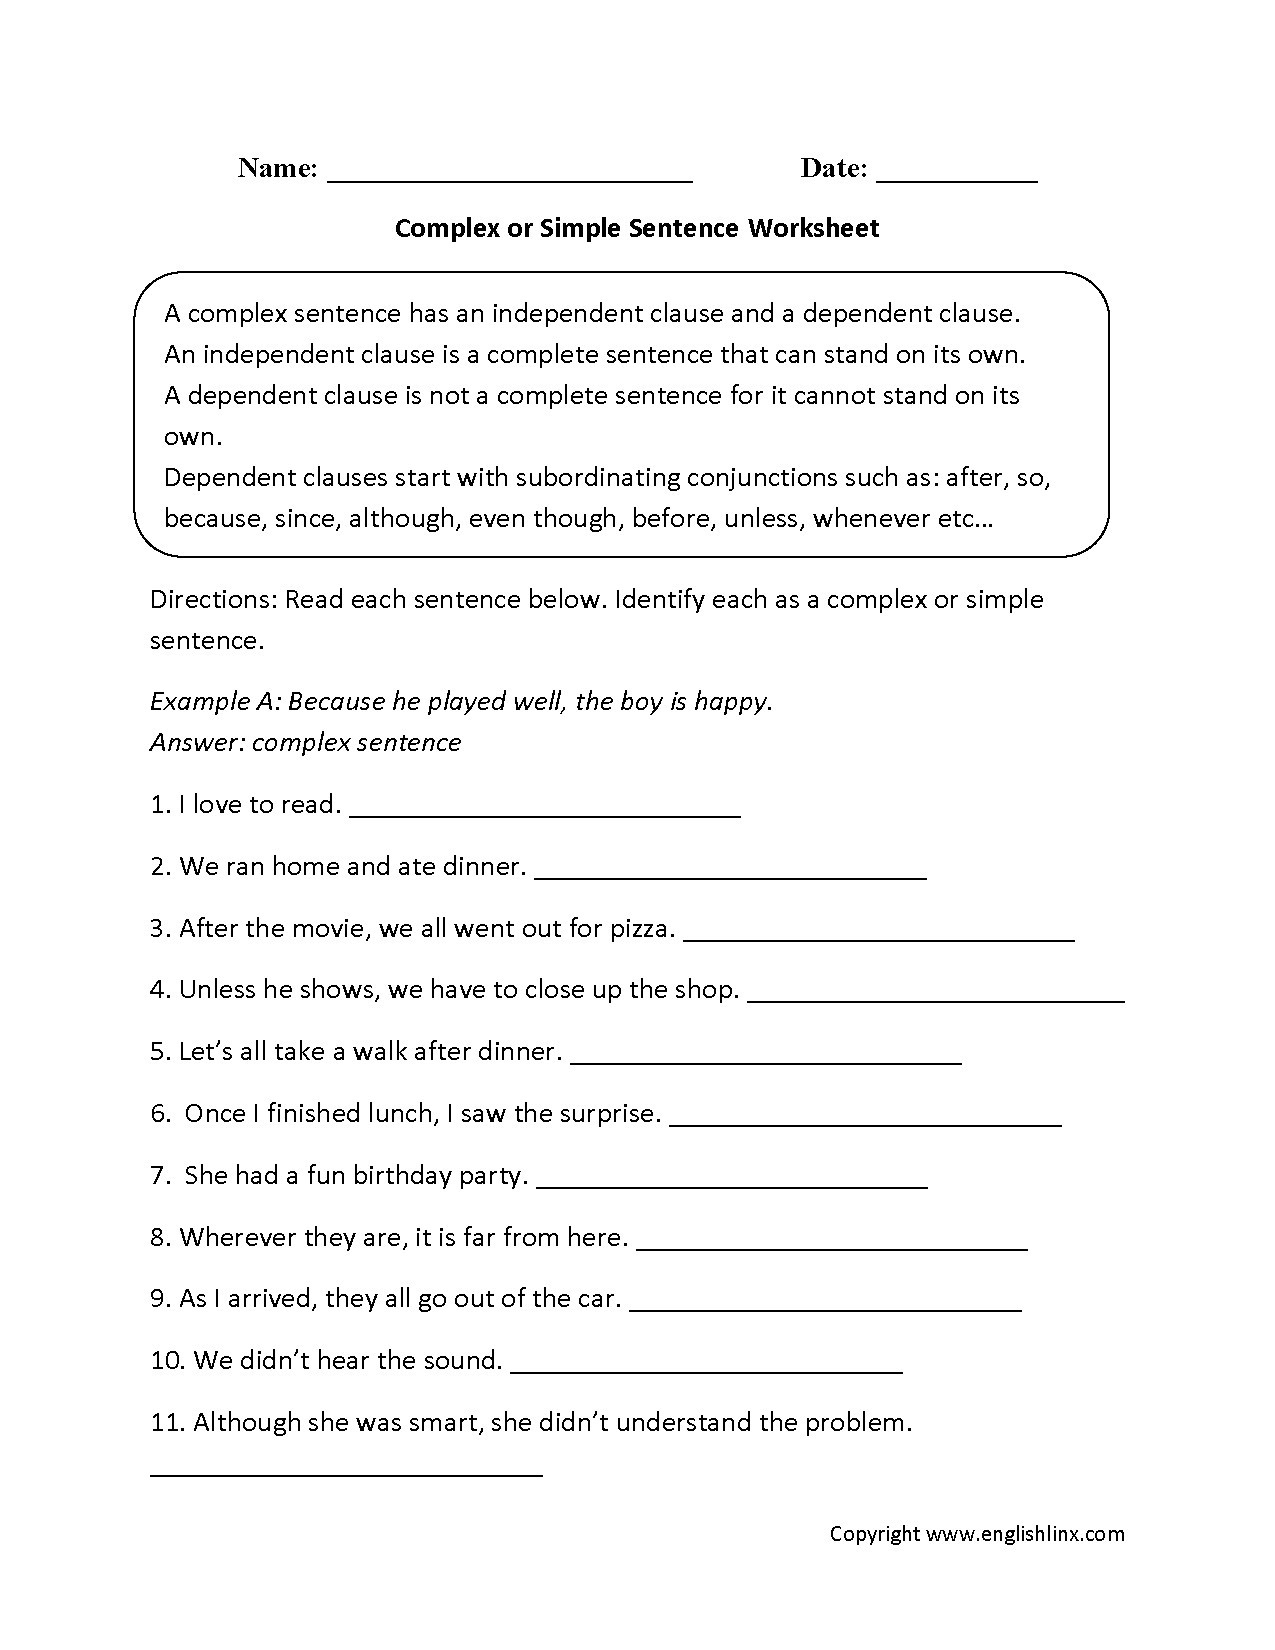 Practicing Object Pronouns Worksheet Ideas For The House Pronoun Year 9 English Worksheets